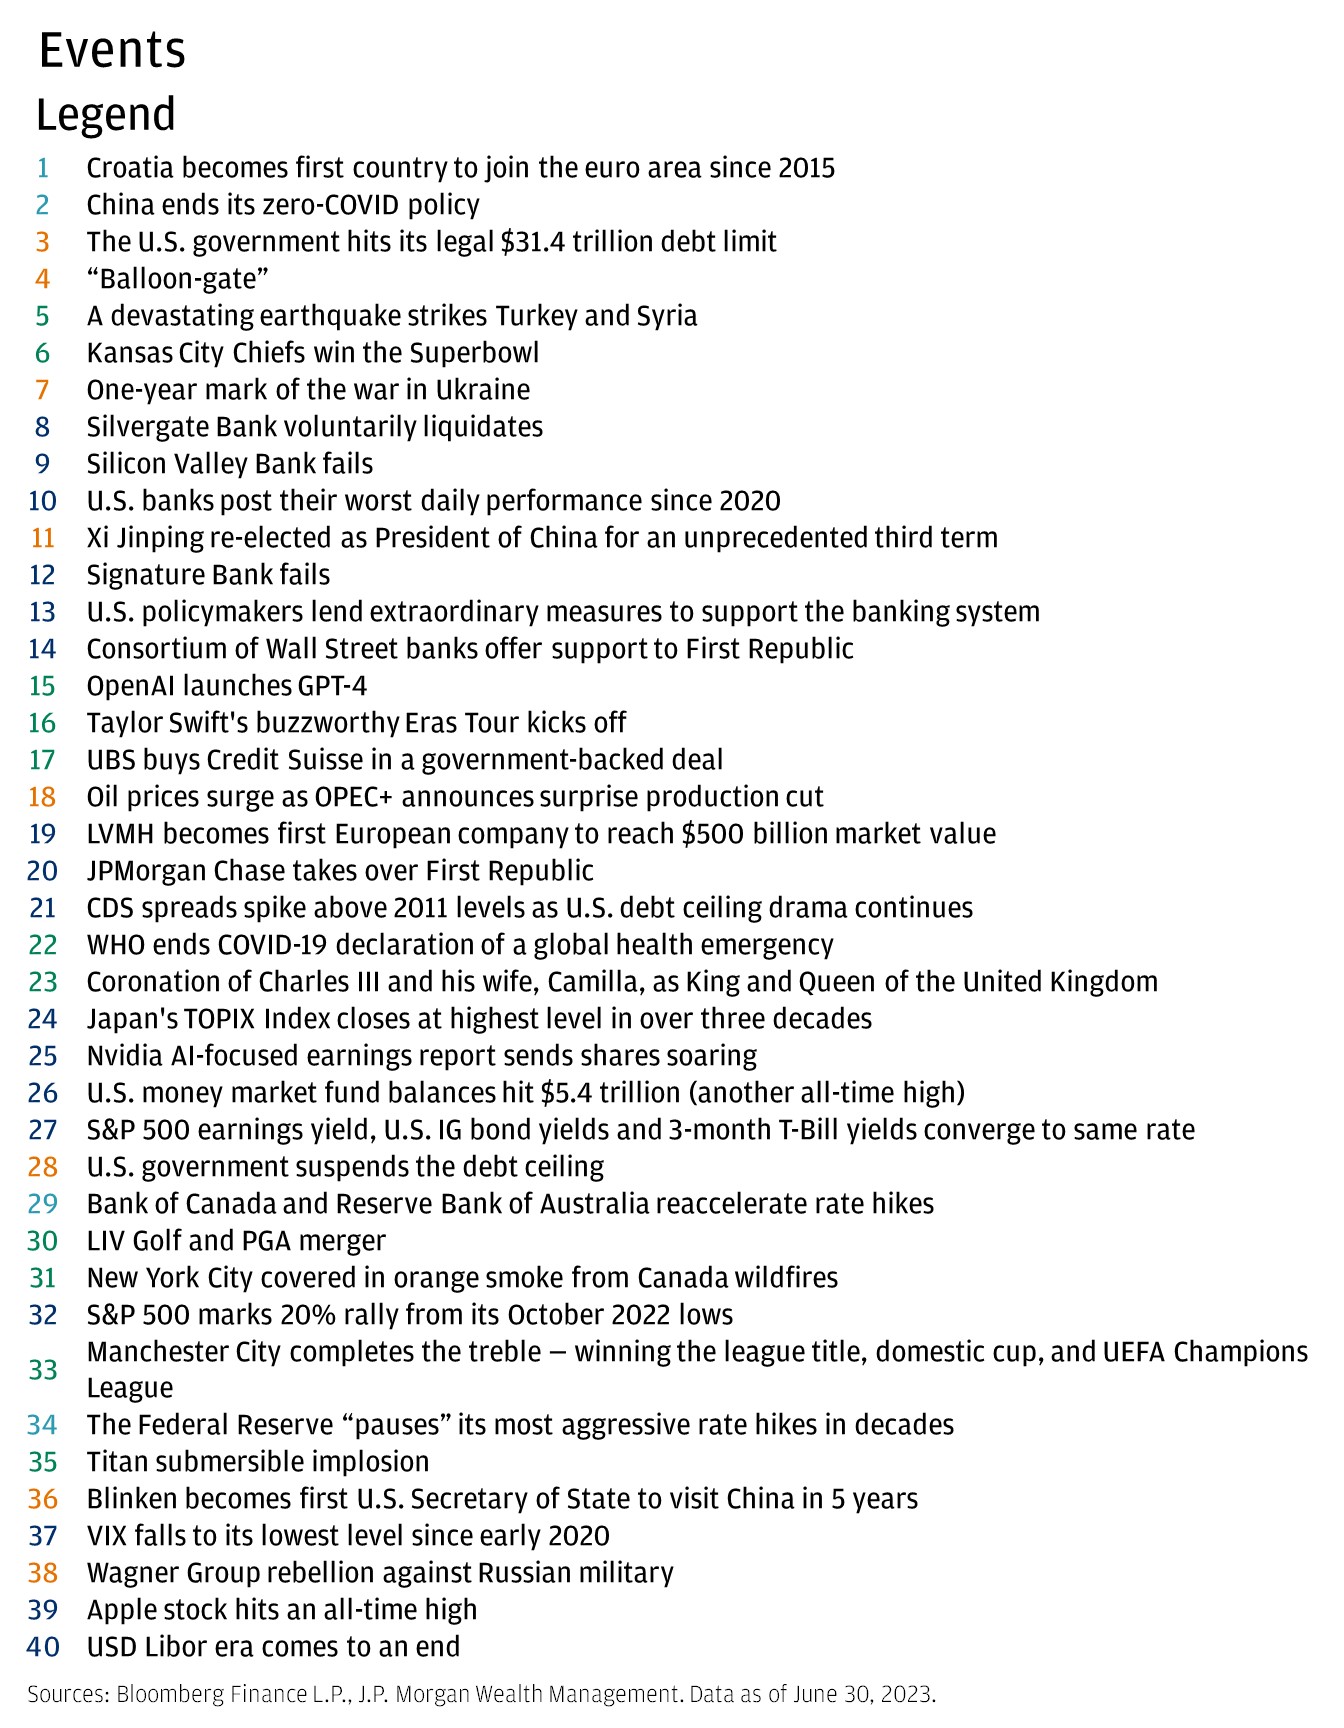 This table shows the 40 events that occurred between January 2023 and June 2023.  1 Croatia becomes first country to join the euro area since 2015 2 China ends its Zero-COVID policy 3 The U.S. government hits its legal $31.4 trillion debt limit  4 “Balloon-gate” 5 A devastating earthquake strikes Turkey and Syria 6 Kansas City Chiefs win the Superbowl 7 One-year mark of the war in Ukraine 8 Silvergate Bank voluntarily liquidates 9 Silicon Valley Bank fails 10 U.S. banks post their worst daily performance since 2020 11 Xi Jinping re-elected as President of China for an unprecedented third term 12 Signature Bank fails 13 U.S. policymakers lend extraordinary measures to support the banking system 14 Consortium of Wall Street banks offer support to First Republic 15 OpenAI launches GPT-4 16 Taylor Swift's buzzworthy Eras Tour kicks off 17 UBS buys Credit Suisse in a government-backed deal 18 Oil prices surge as OPEC+ announces surprise production cut 19 LVMH becomes first European company to reach $500 billion market value 20 JPMorgan Chase takes over First Republic 21 CDS spreads spike above 2011 levels as U.S. debt ceiling drama continues 22 WHO ends COVID-19 declaration of a global health emergency 23 Coronation of Charles III and his wife, Camilla, as King and Queen of the United Kingdom 24 Japan's TOPIX Index closes at highest level in over three decades 25 Nvidia AI-focused earnings report sends shares soaring 26 U.S. money market fund balances hit $5.4 trillion (another all-time high) 27 S&P 500 earnings yield, U.S. IG bond yields, and 3-month T-Bill yields converge to same rate 28 U.S. government suspends the debt ceiling 29 Bank of Canada and Reserve Bank of Australia reaccelerate rate hikes 30 LIV Golf and PGA merger 31 New York City covered in orange smoke from Canada wildfires 32 S&P 500 marks 20% rally from its October 2022 lows 33 Manchester City completes the treble — winning the league title, domestic cup, and European Championship League 34 The Federal Reserve “pauses” its most aggressive rate hikes in decades 35 Titan submersible implosion 36 Blinken becomes first U.S. Secretary of State to visit China in 5 years 37 VIX falls to its lowest level since early 2020 38 Wagner Group rebellion against Russian military 39 Apple stock hits an all-time high 40 USD Libor era comes to an end 